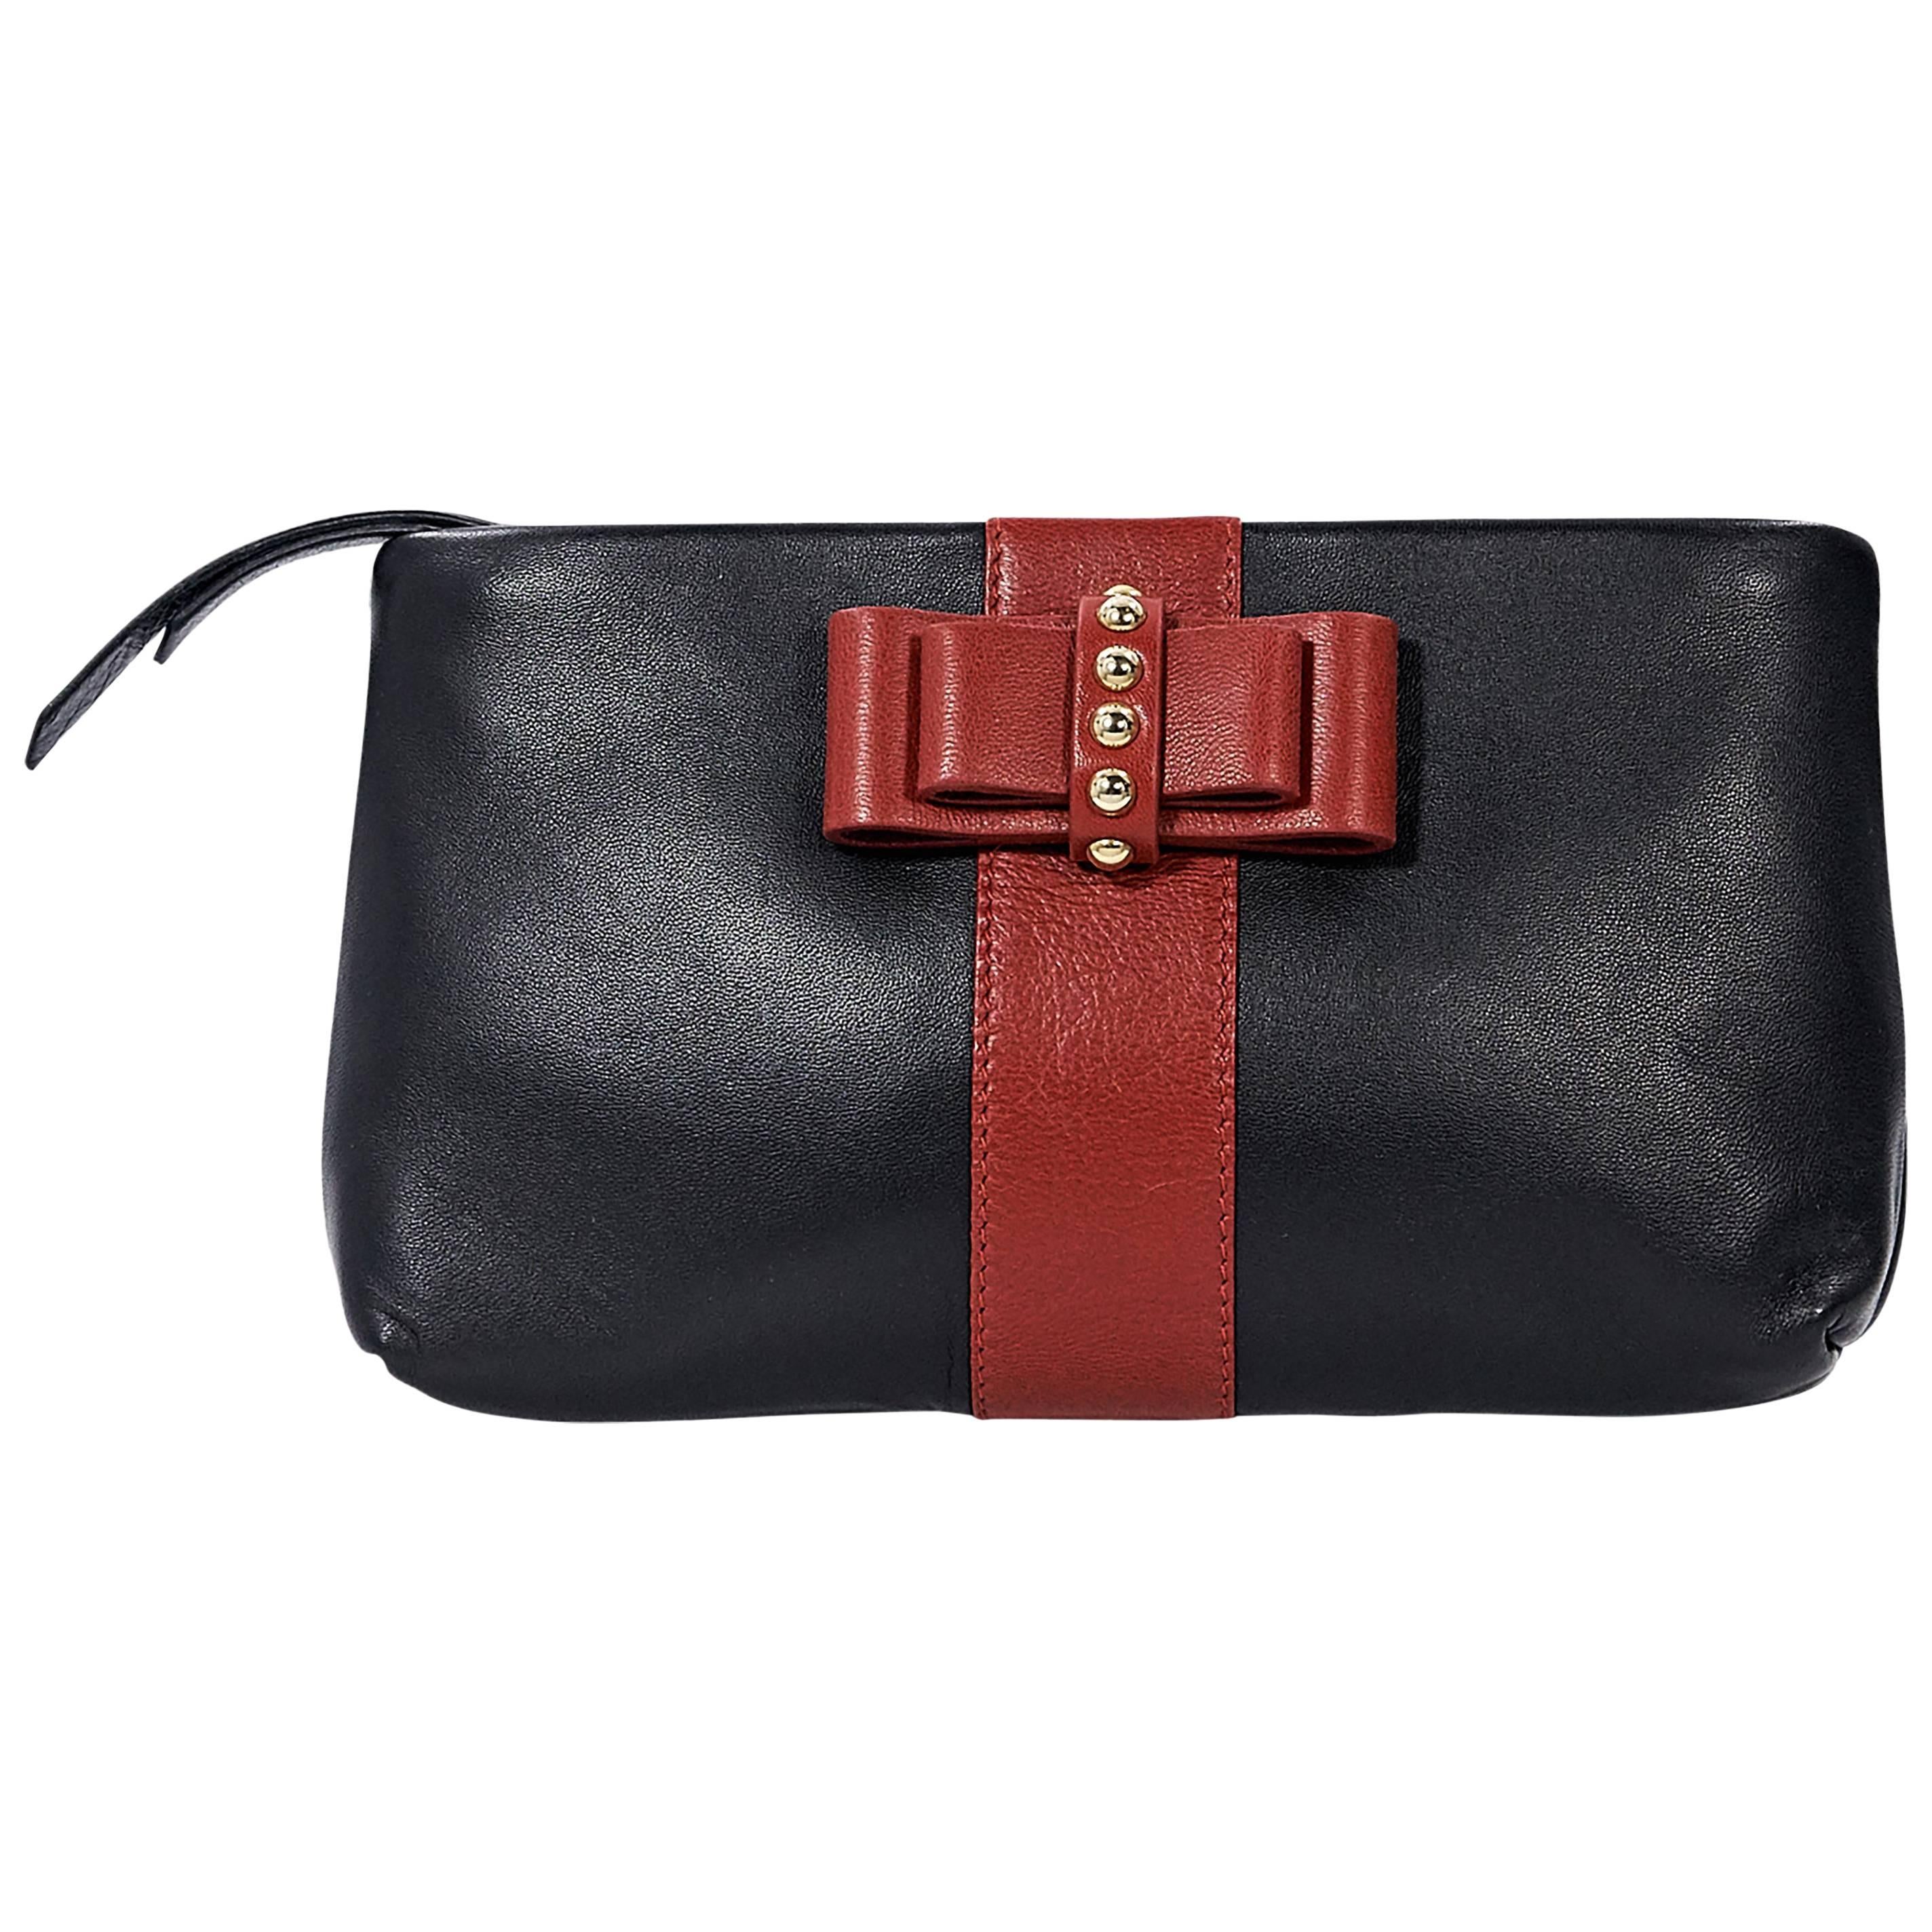 Black & Red Christian Louboutin Charity Clutch